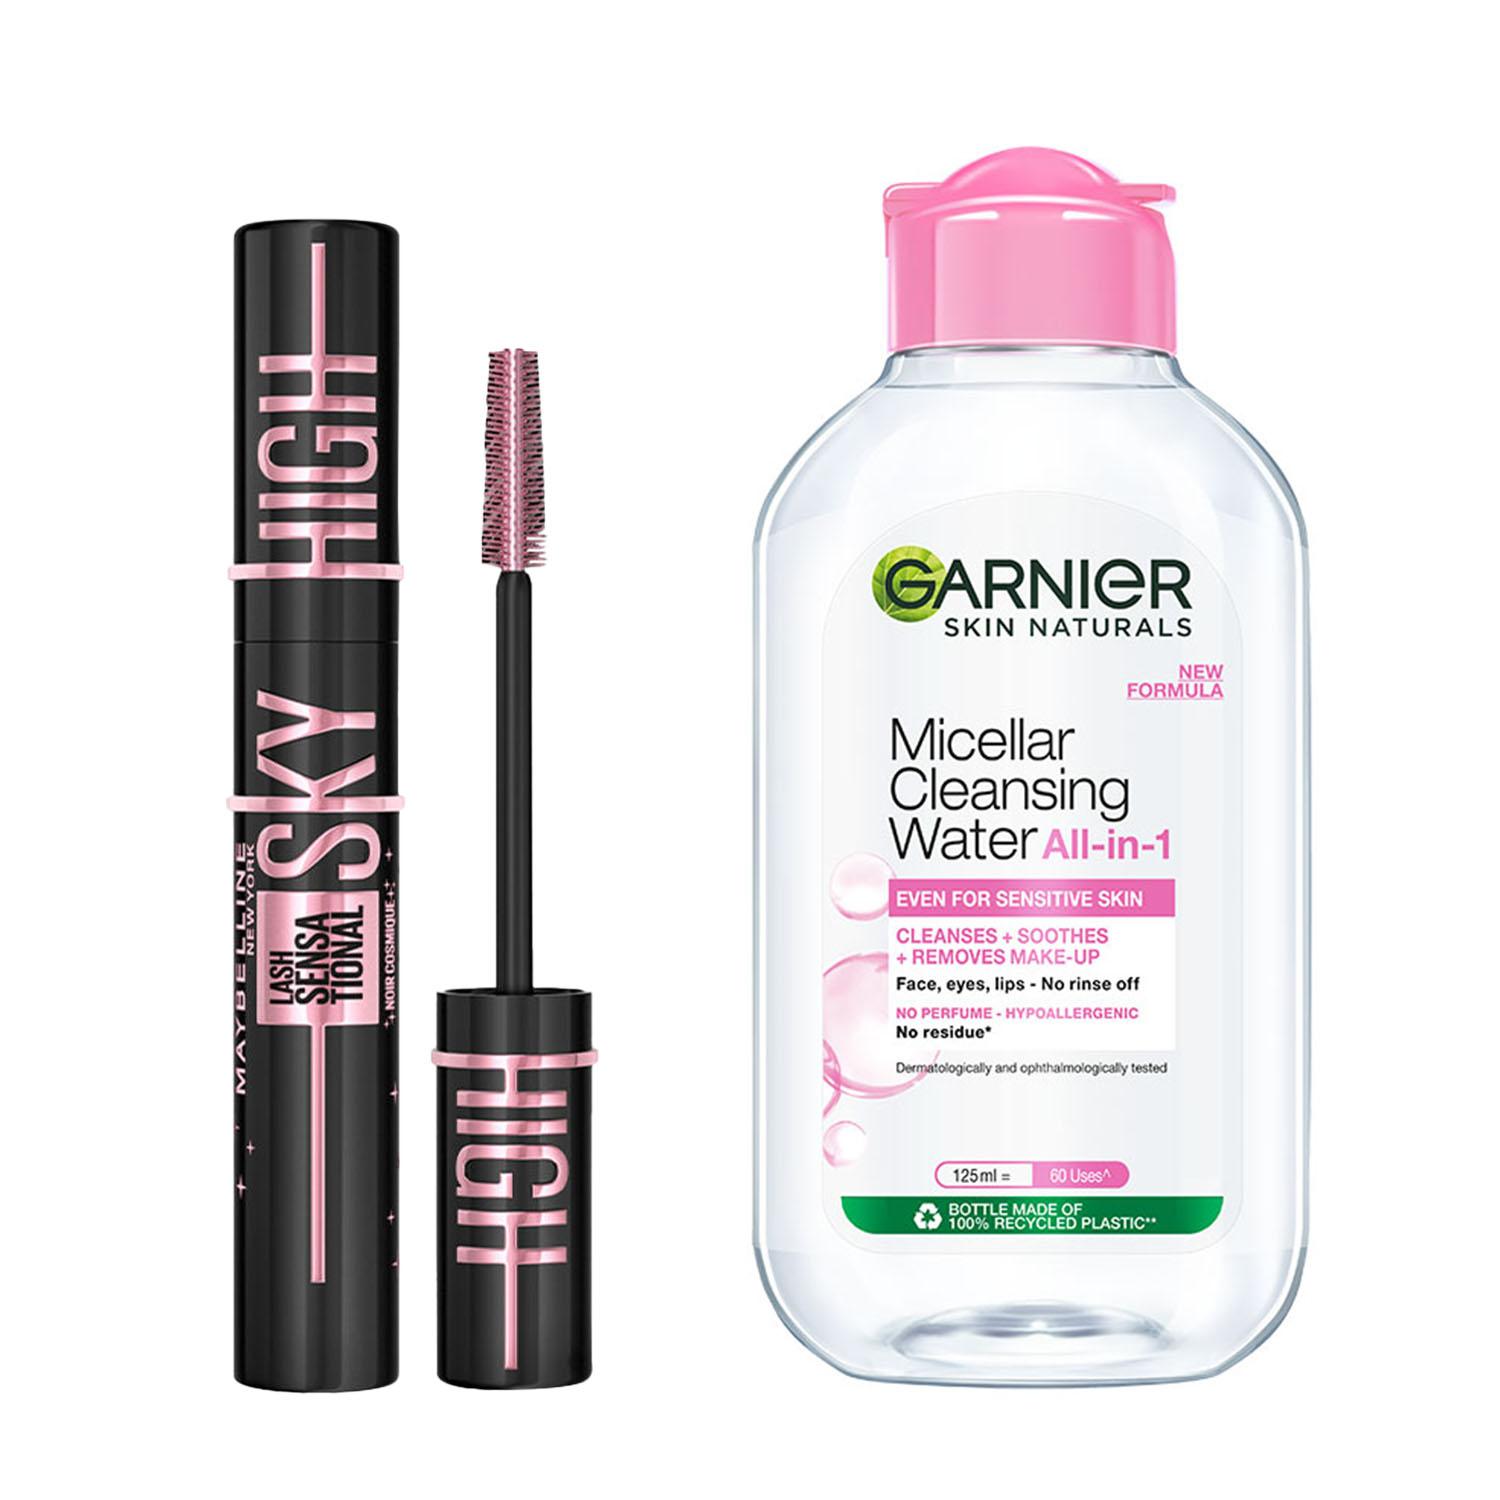 Maybelline New York | Maybelline New York Sky High Cosmic Black Mascara with Garnier Micellar Cleansing Water Combo